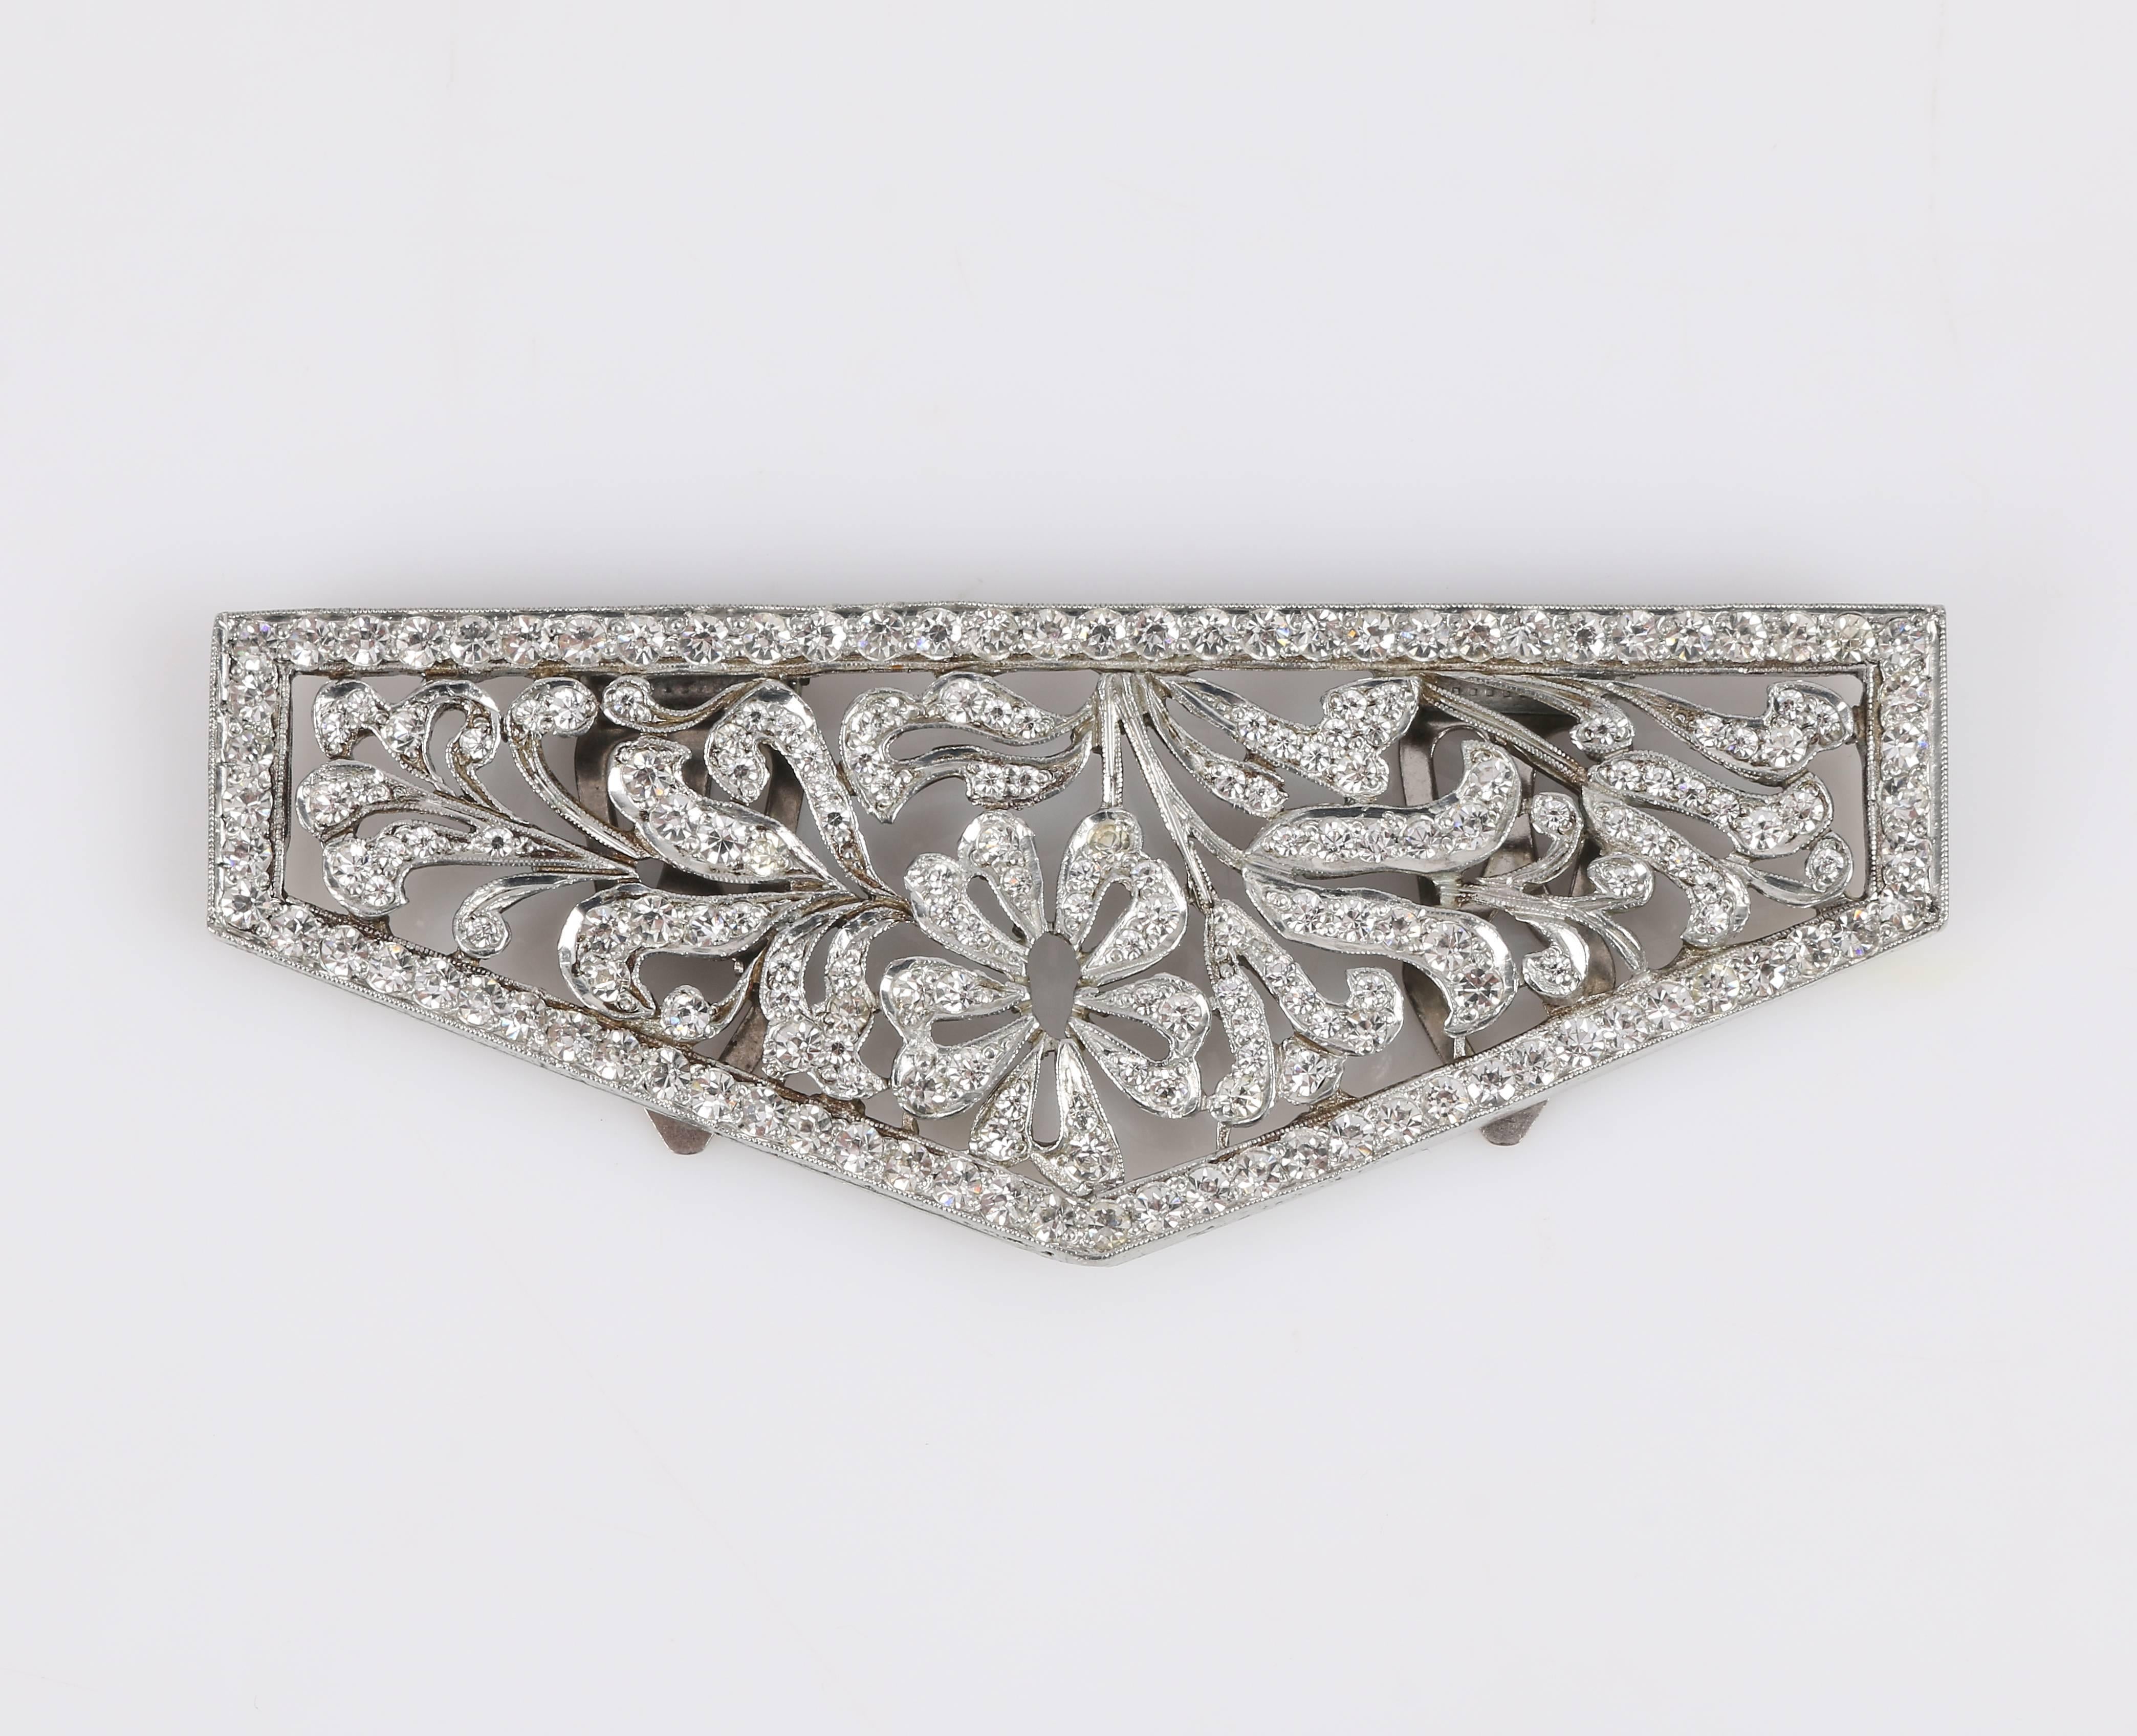 Vintage c.1930's floral open work cut steel silver-tone dress / fur clip. Elongated pentagon shape with rhinestone crystal boarder. Open work rhinestone embellished floral detailing. Two hinged three prong clasps at back (measuring approximately 1